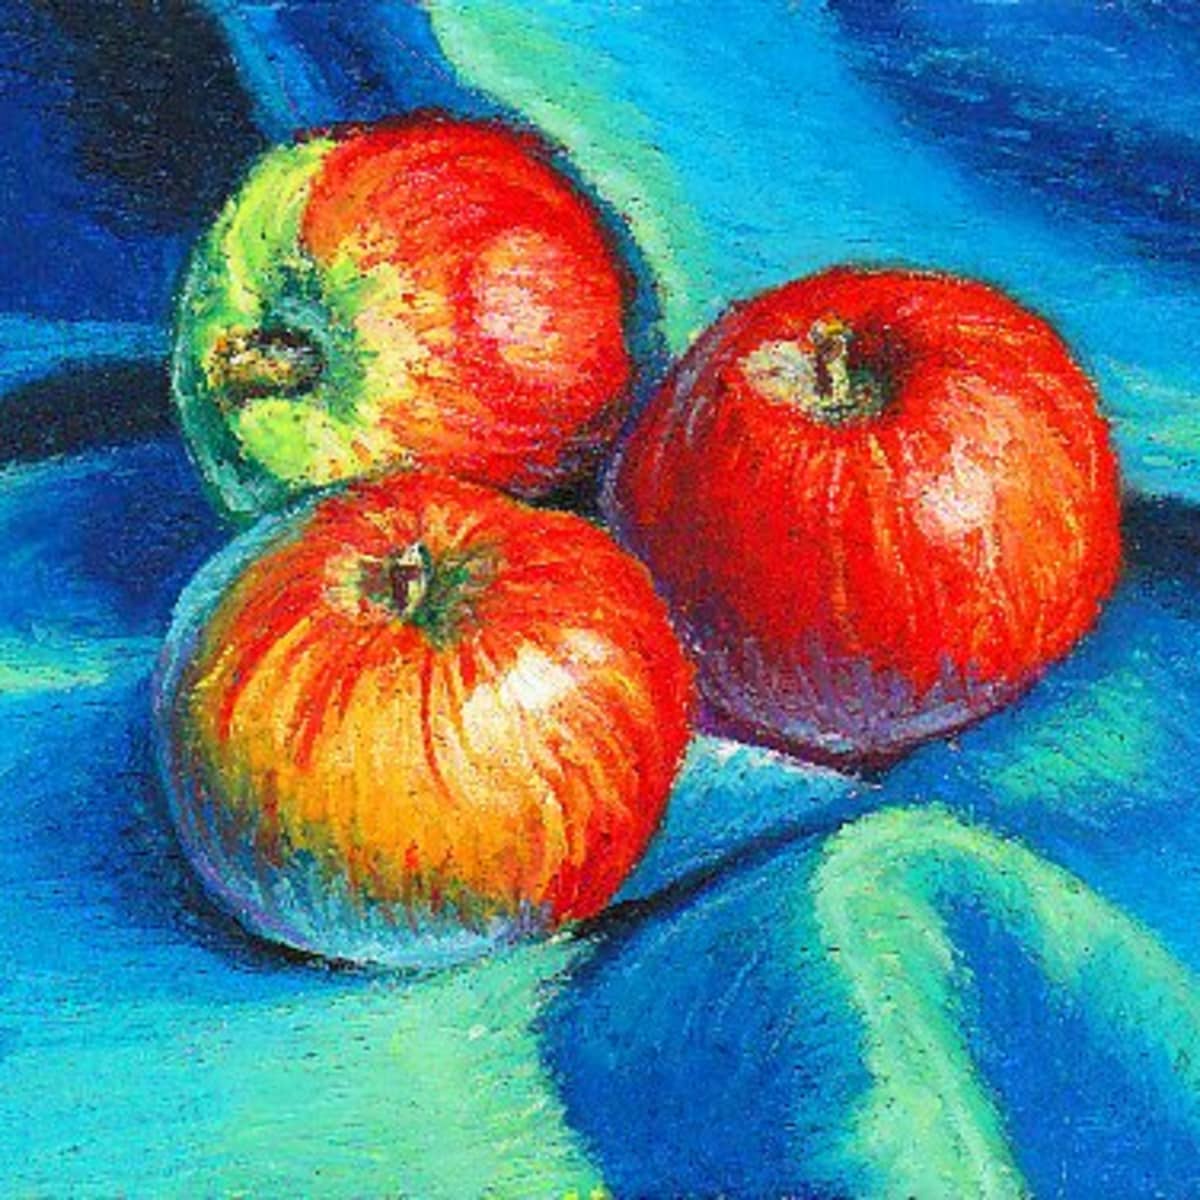 inexpensive versatile oil pastels for sketching and fine art